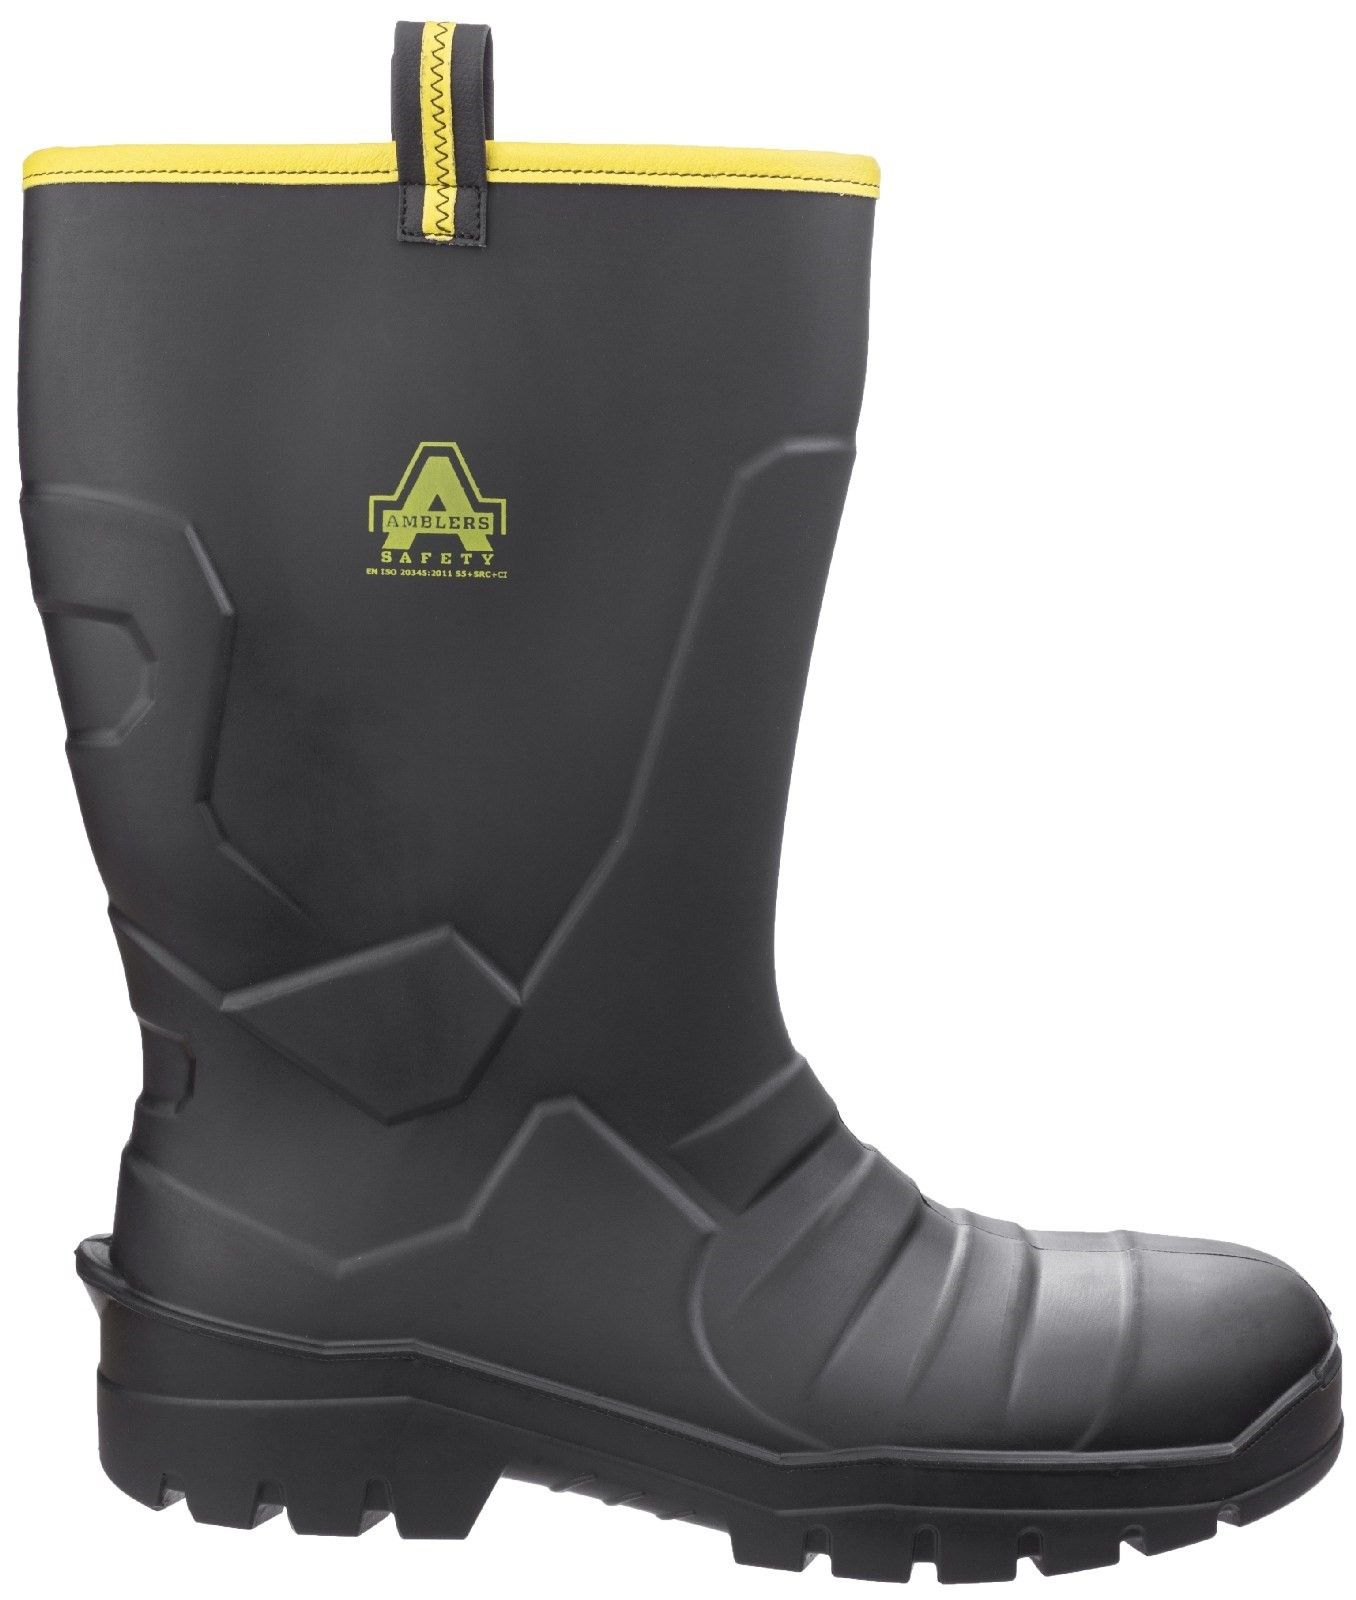 LIGHT! STRONG! COMFORTABLE! WARM! Versatile full safety rigger boot featuring S5 safety components.  The uppers are expertly designed to enhance water run-off and internal thermal insulation protects against temperatures as low as -20 degrees c.Polyurethane textile lining. 
Thermal insulation up to -20C. 
Removable insole for extra comfort. 
Sole resistant to oils, fats, acids and organic solvents. 
Slip resistant and anti-static sole.